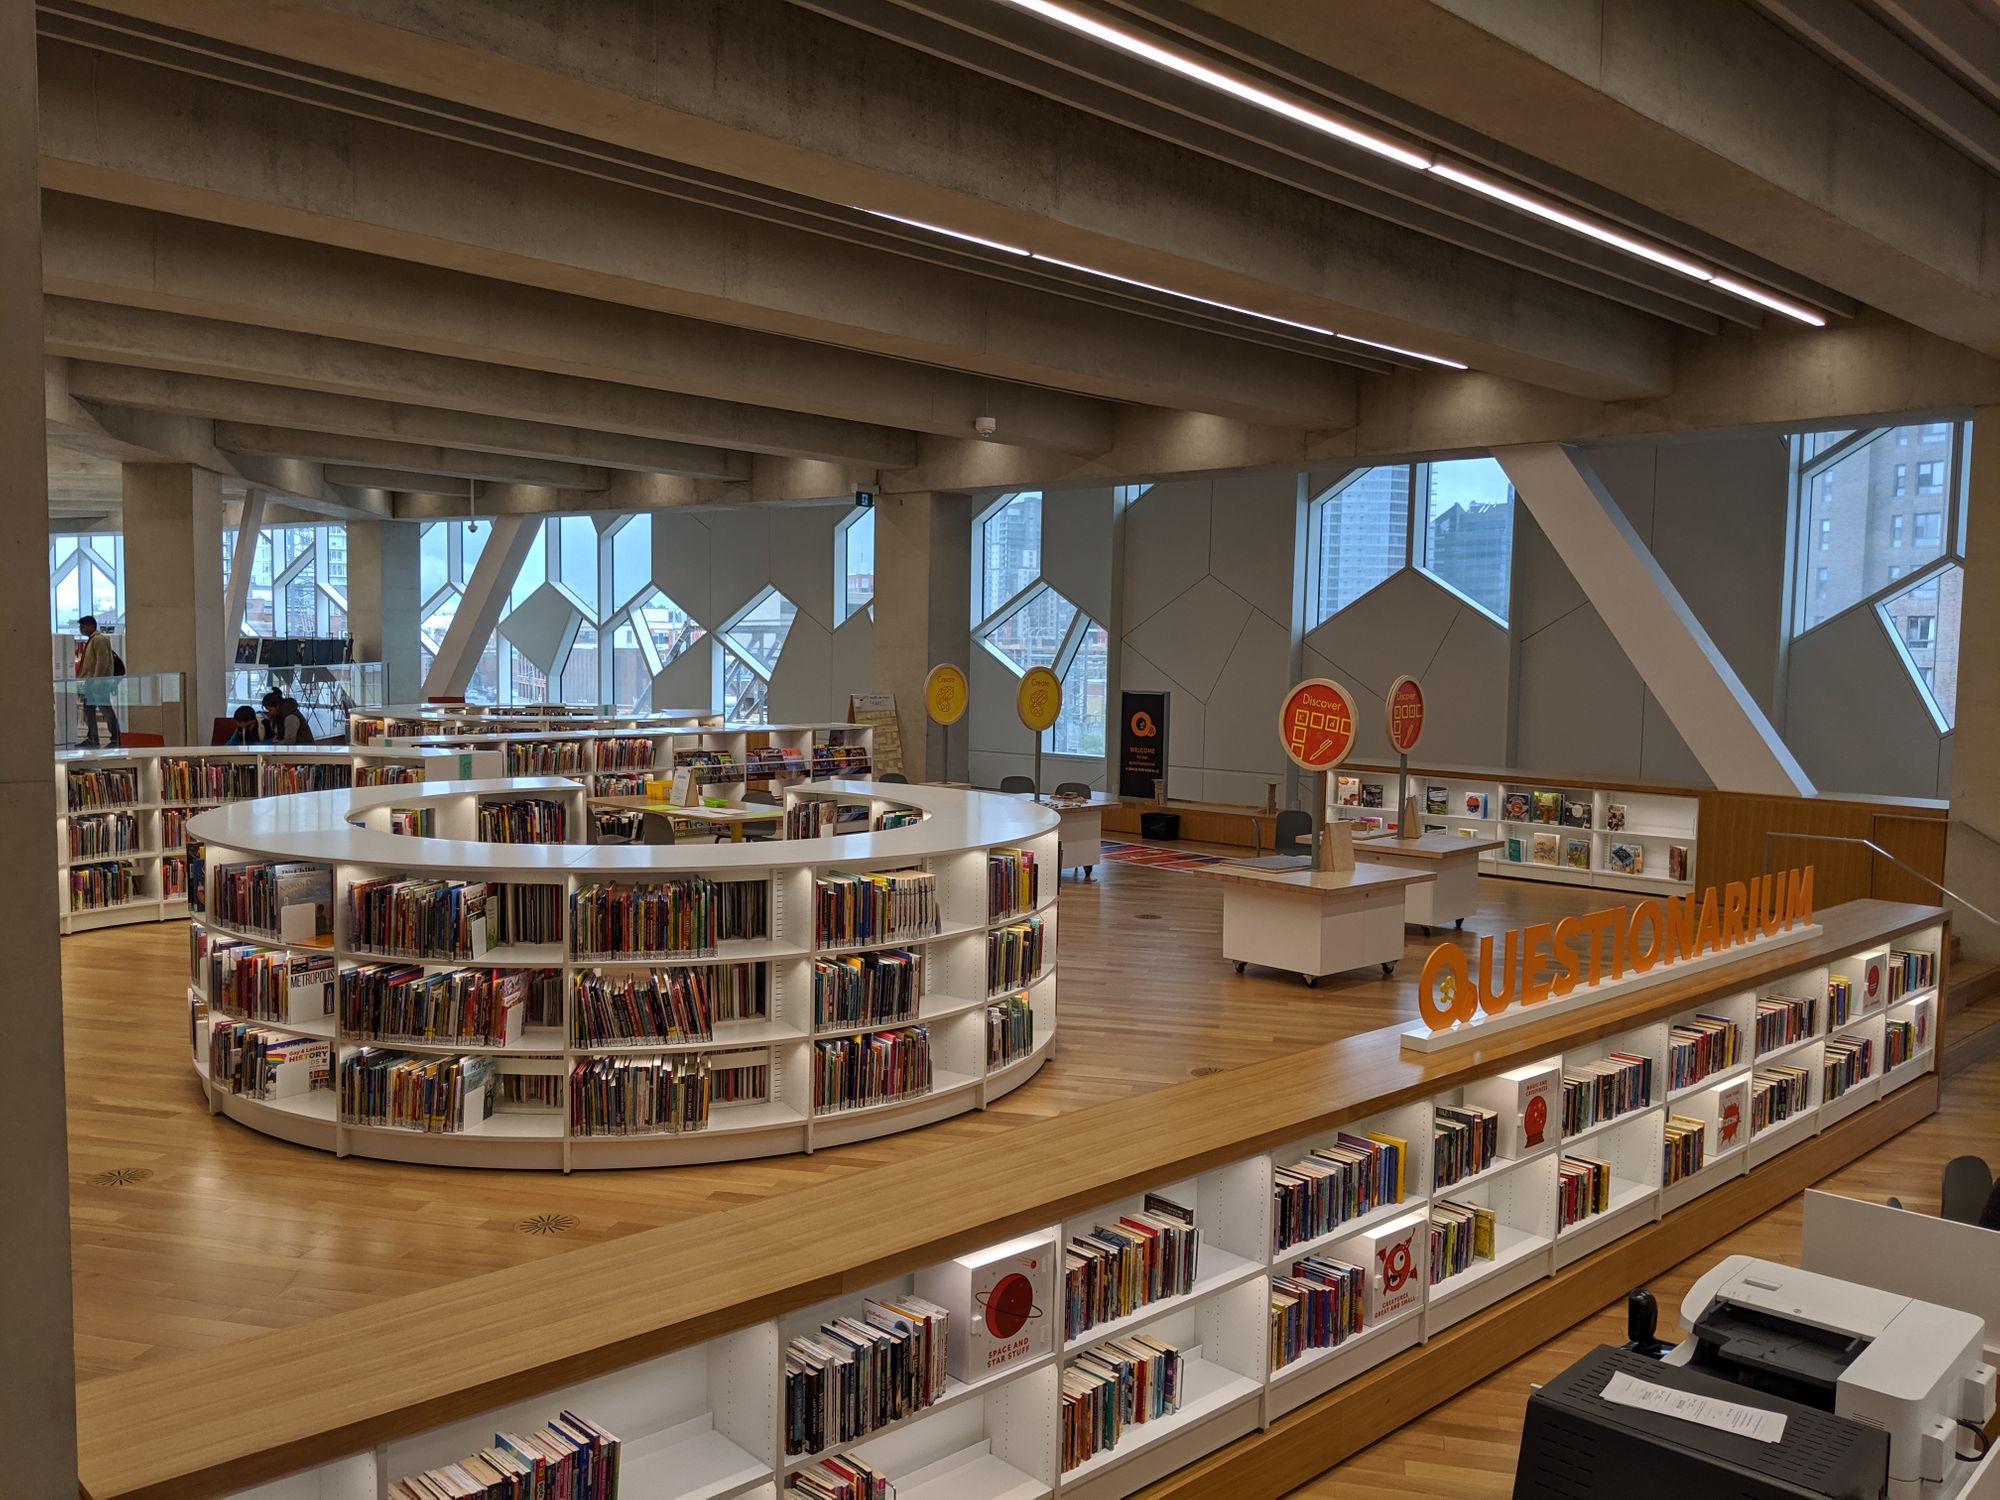 Calgary Central Library: combining intimacy and civic statement